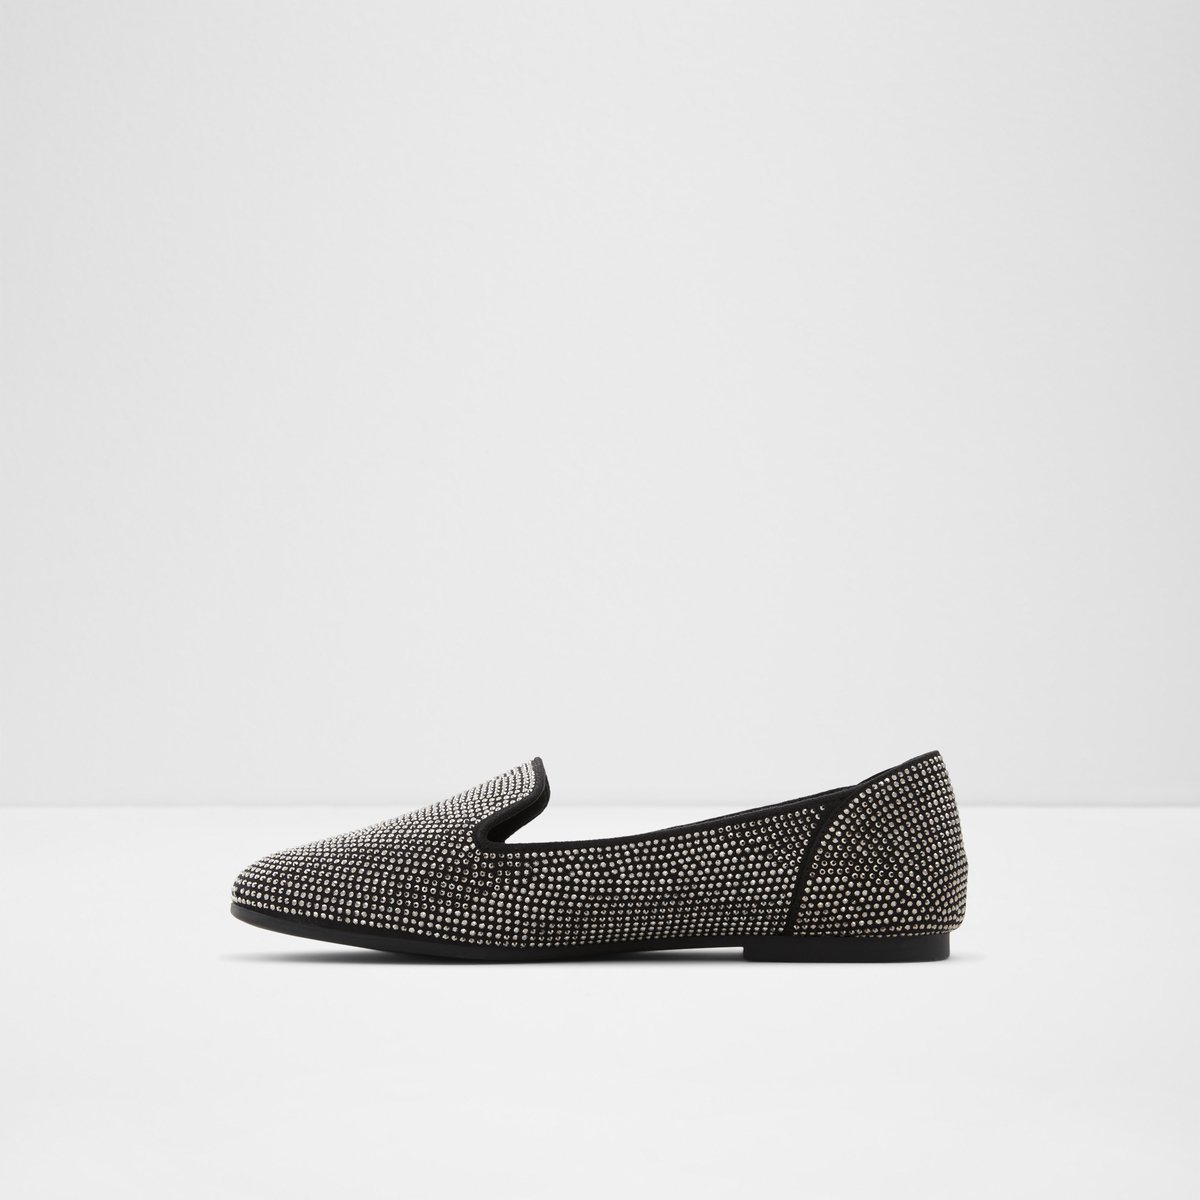 Mythimna Black Textile Mixed Material Women's Loafers & Oxfords | ALDO ...